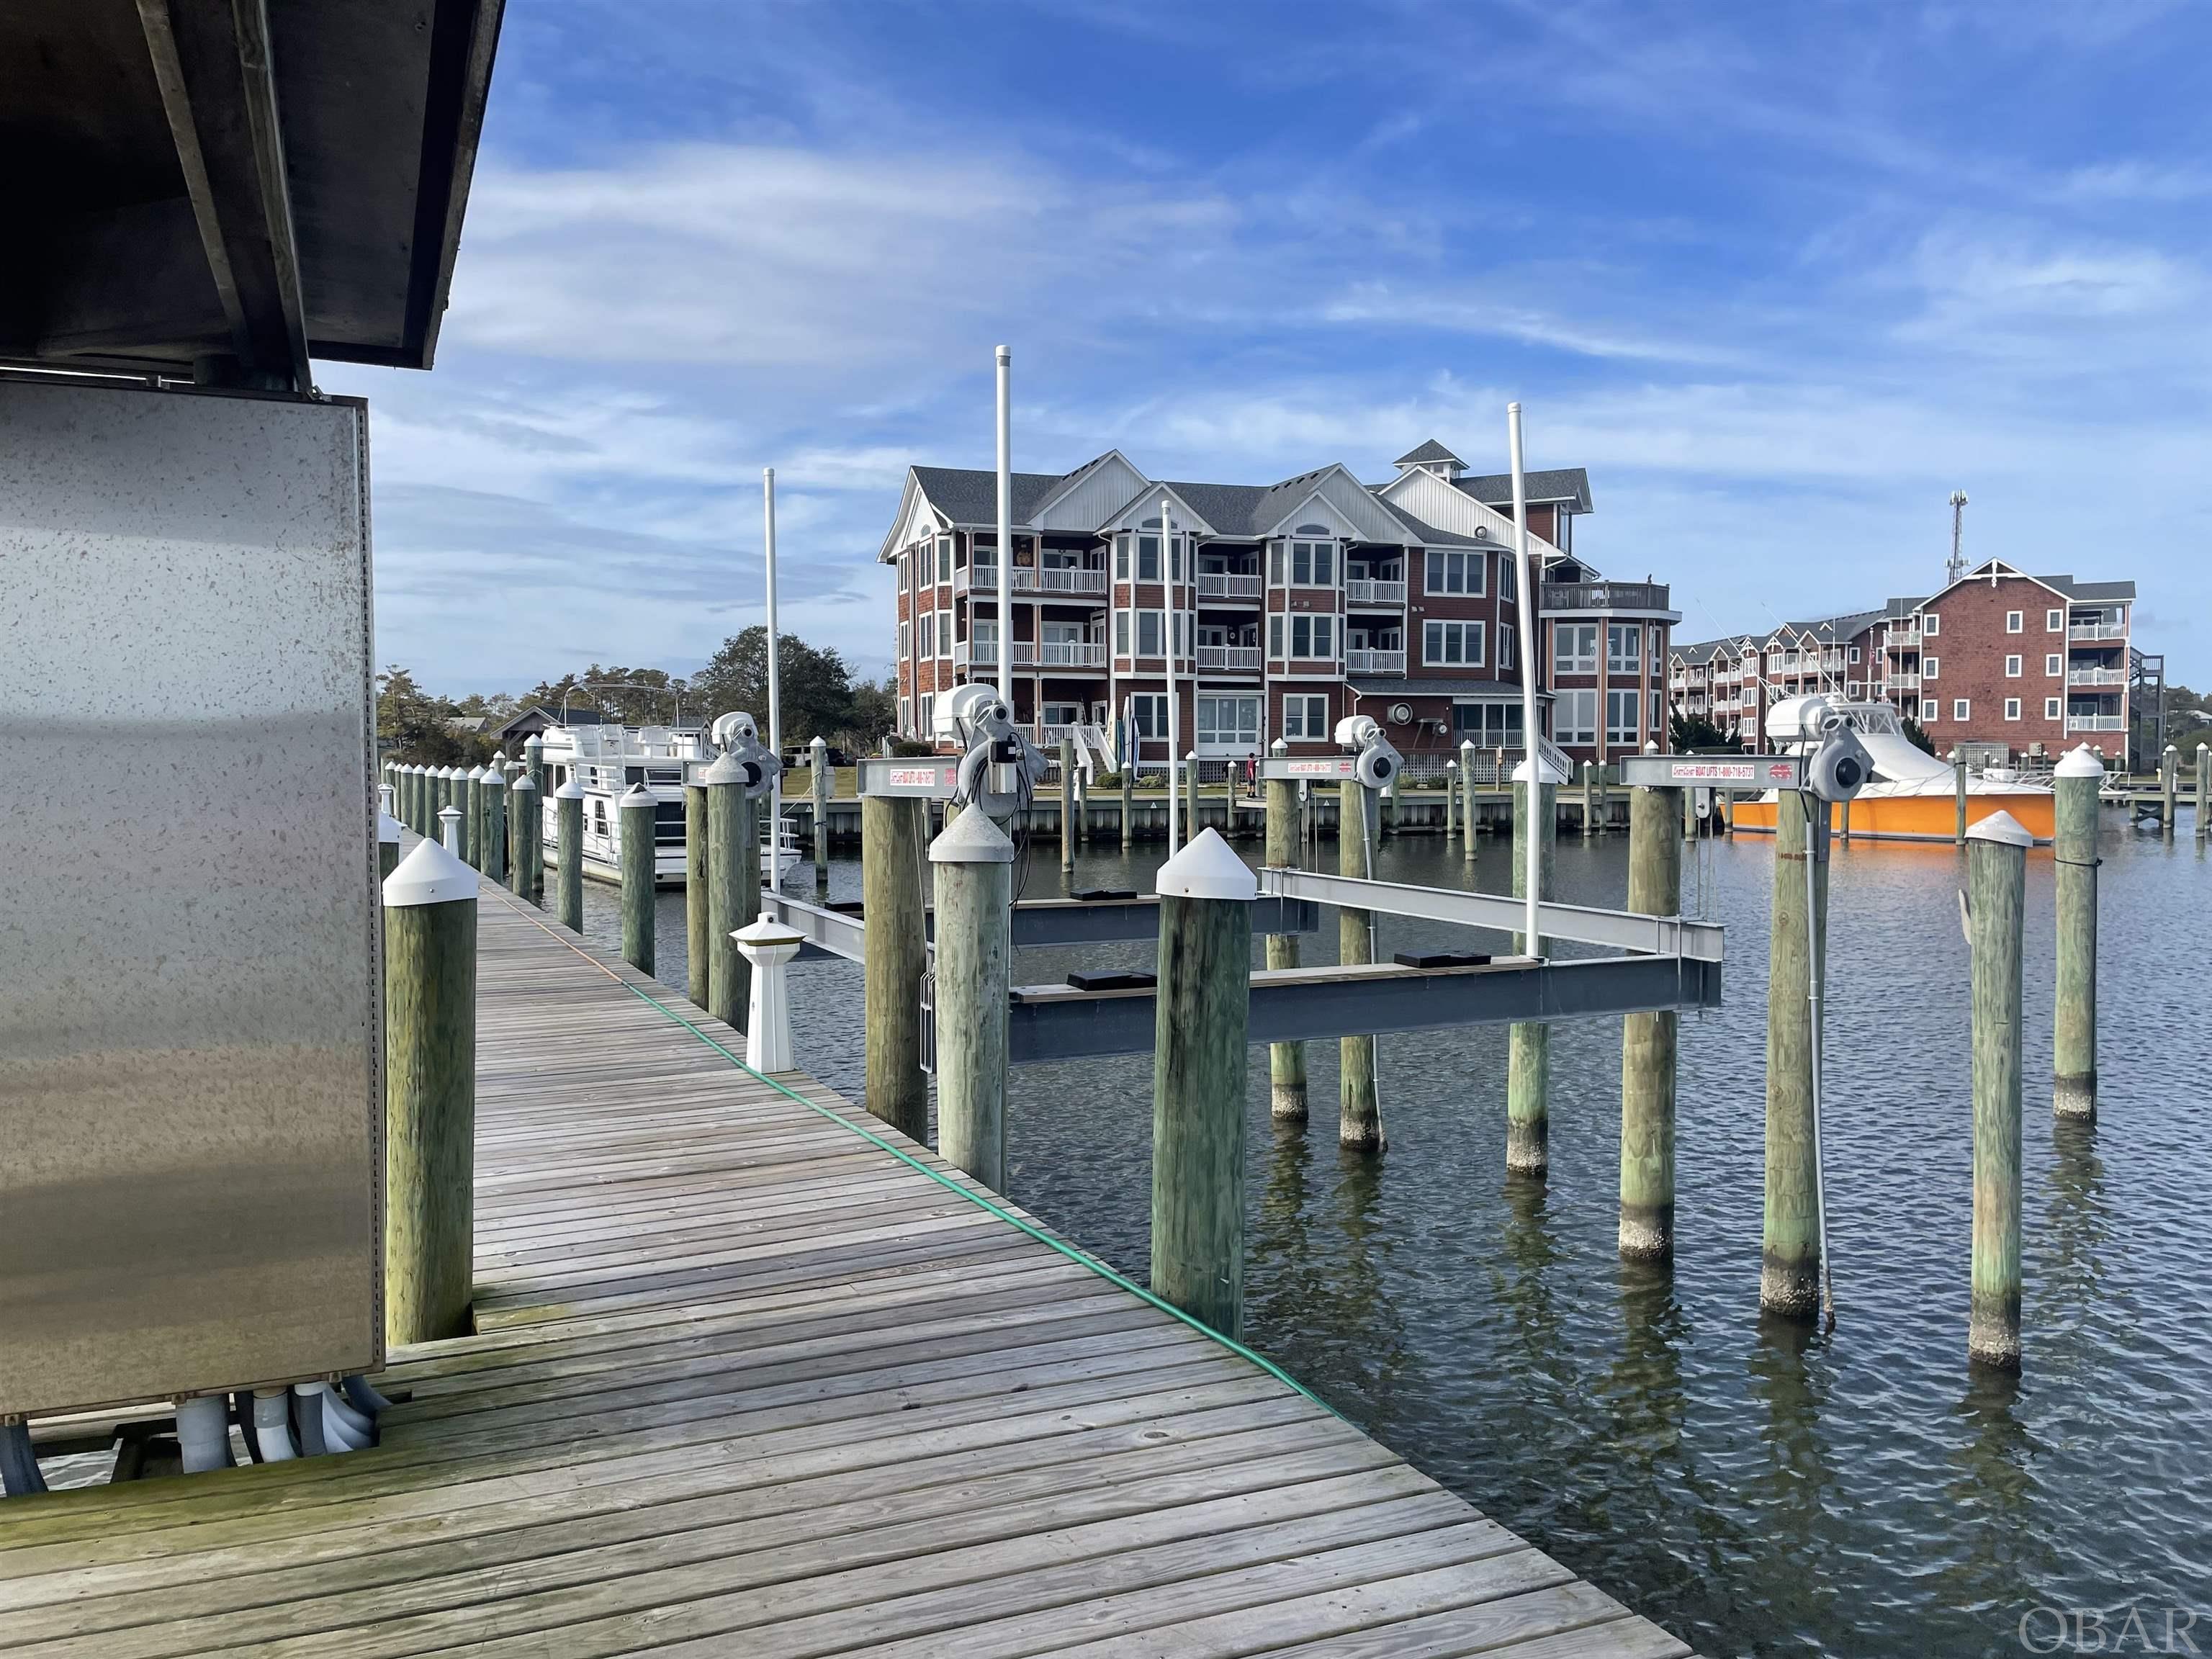 This is the boat slip you have been waiting for. Currently it is the only slip in Shallowbag Bay with a boat lift.  Lift is rated for a 30,000lb boat.  Slip is 18x40 and in the perfect location, easy access to the Roanoke sound and right next to the gazebo and picnic benches for spending lazy days at the marina. Shallowbag Bay Marina has a community pool, hot tub and fitness center with pool table and ping pong table. There's a ships store, shower facilities and Striper's restaurant. They also have a fish cleaning station, laundry facilities, pump out,  and 5 fueling stations providing "in slip" fueling to most boats.  Slip comes with two raised dock boxes. 1 bedroom condo for sale in the building right in front of boat slip.